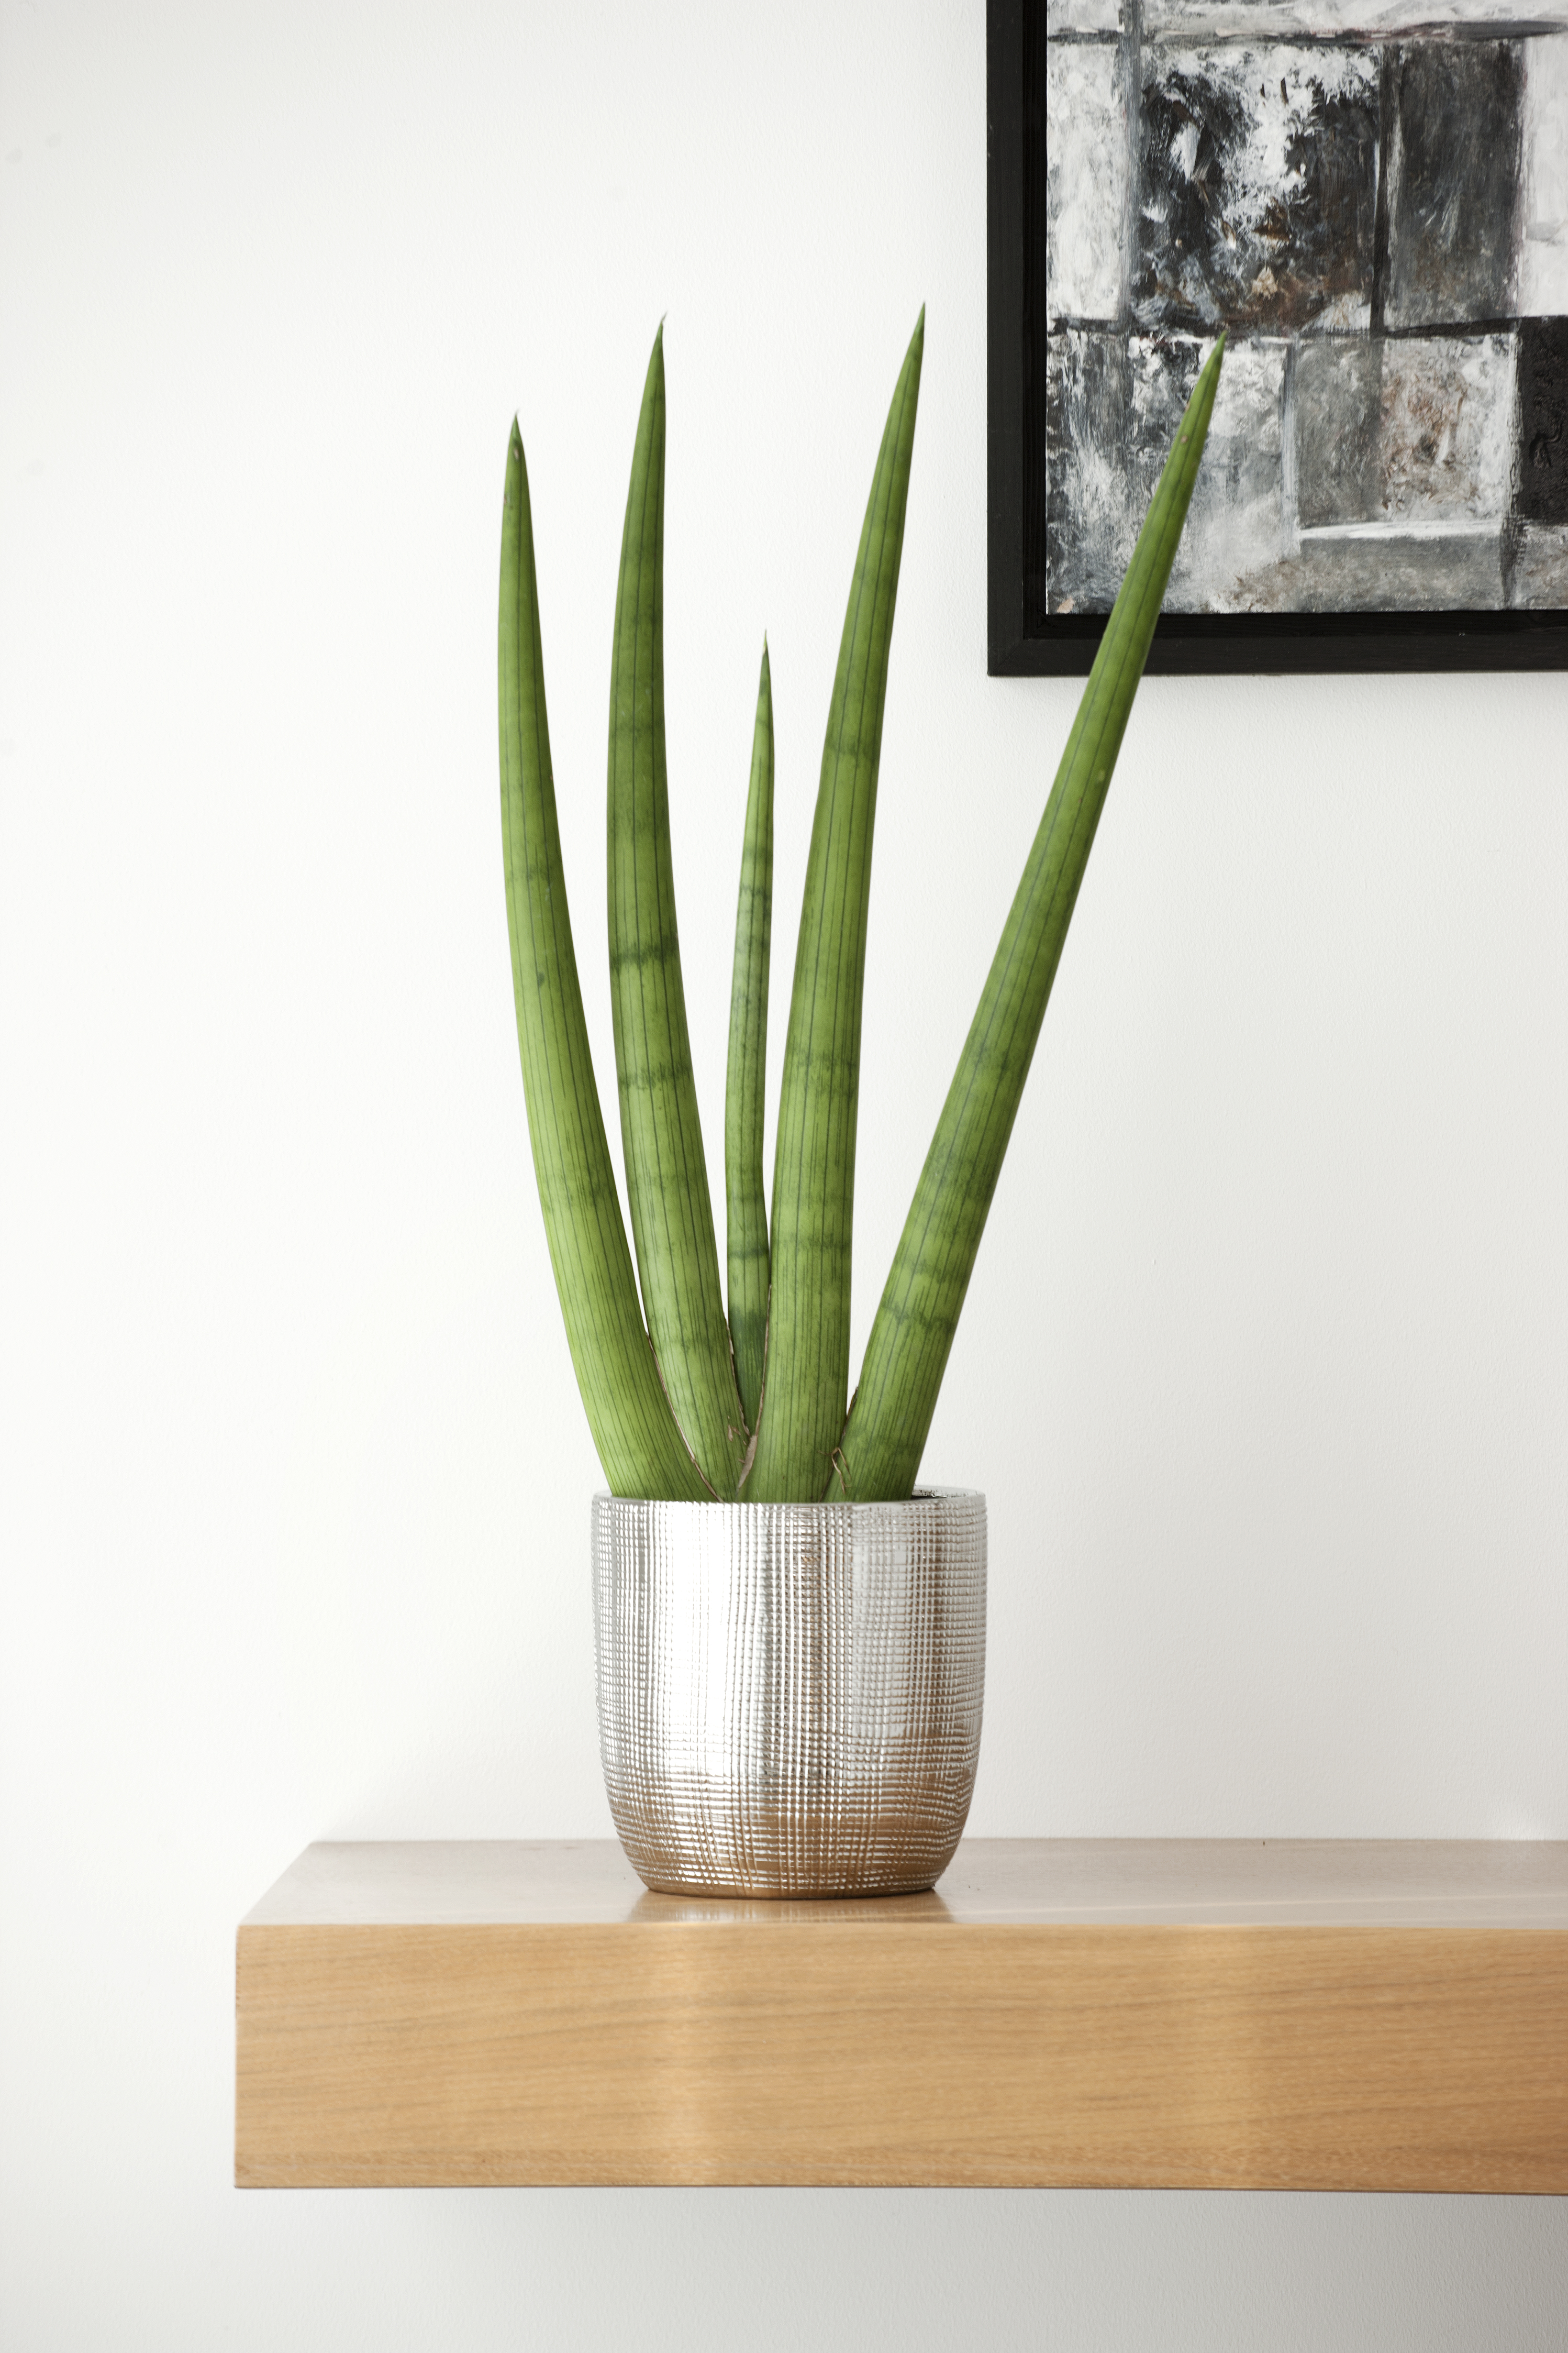 Sansevieria Wallpapers High Quality | Download Free